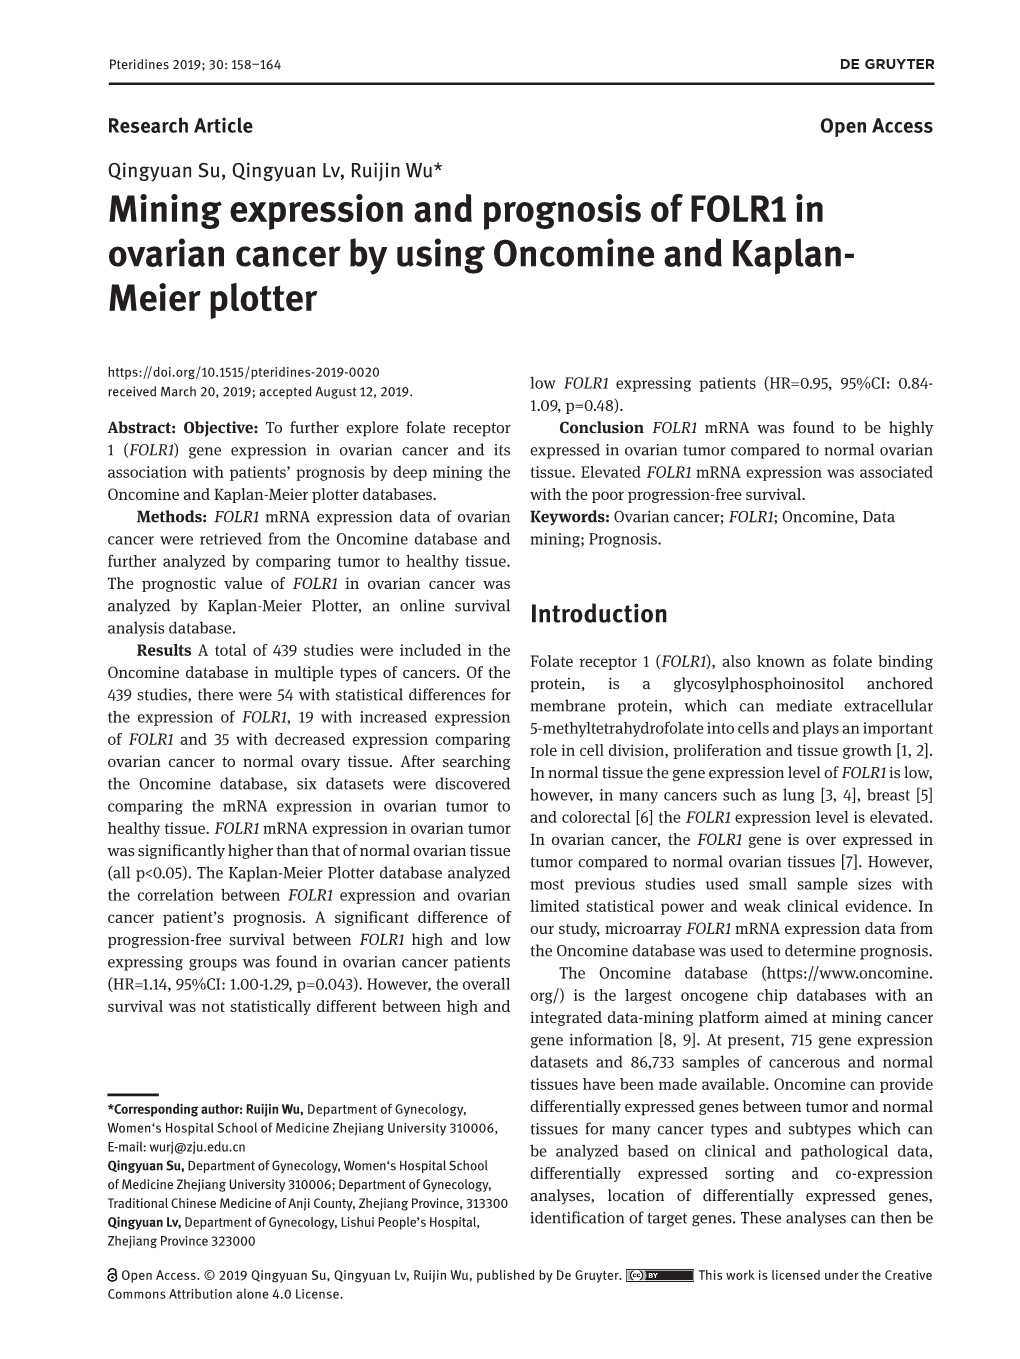 Mining Expression and Prognosis of FOLR1 in Ovarian Cancer by Using Oncomine and Kaplan- Meier Plotter